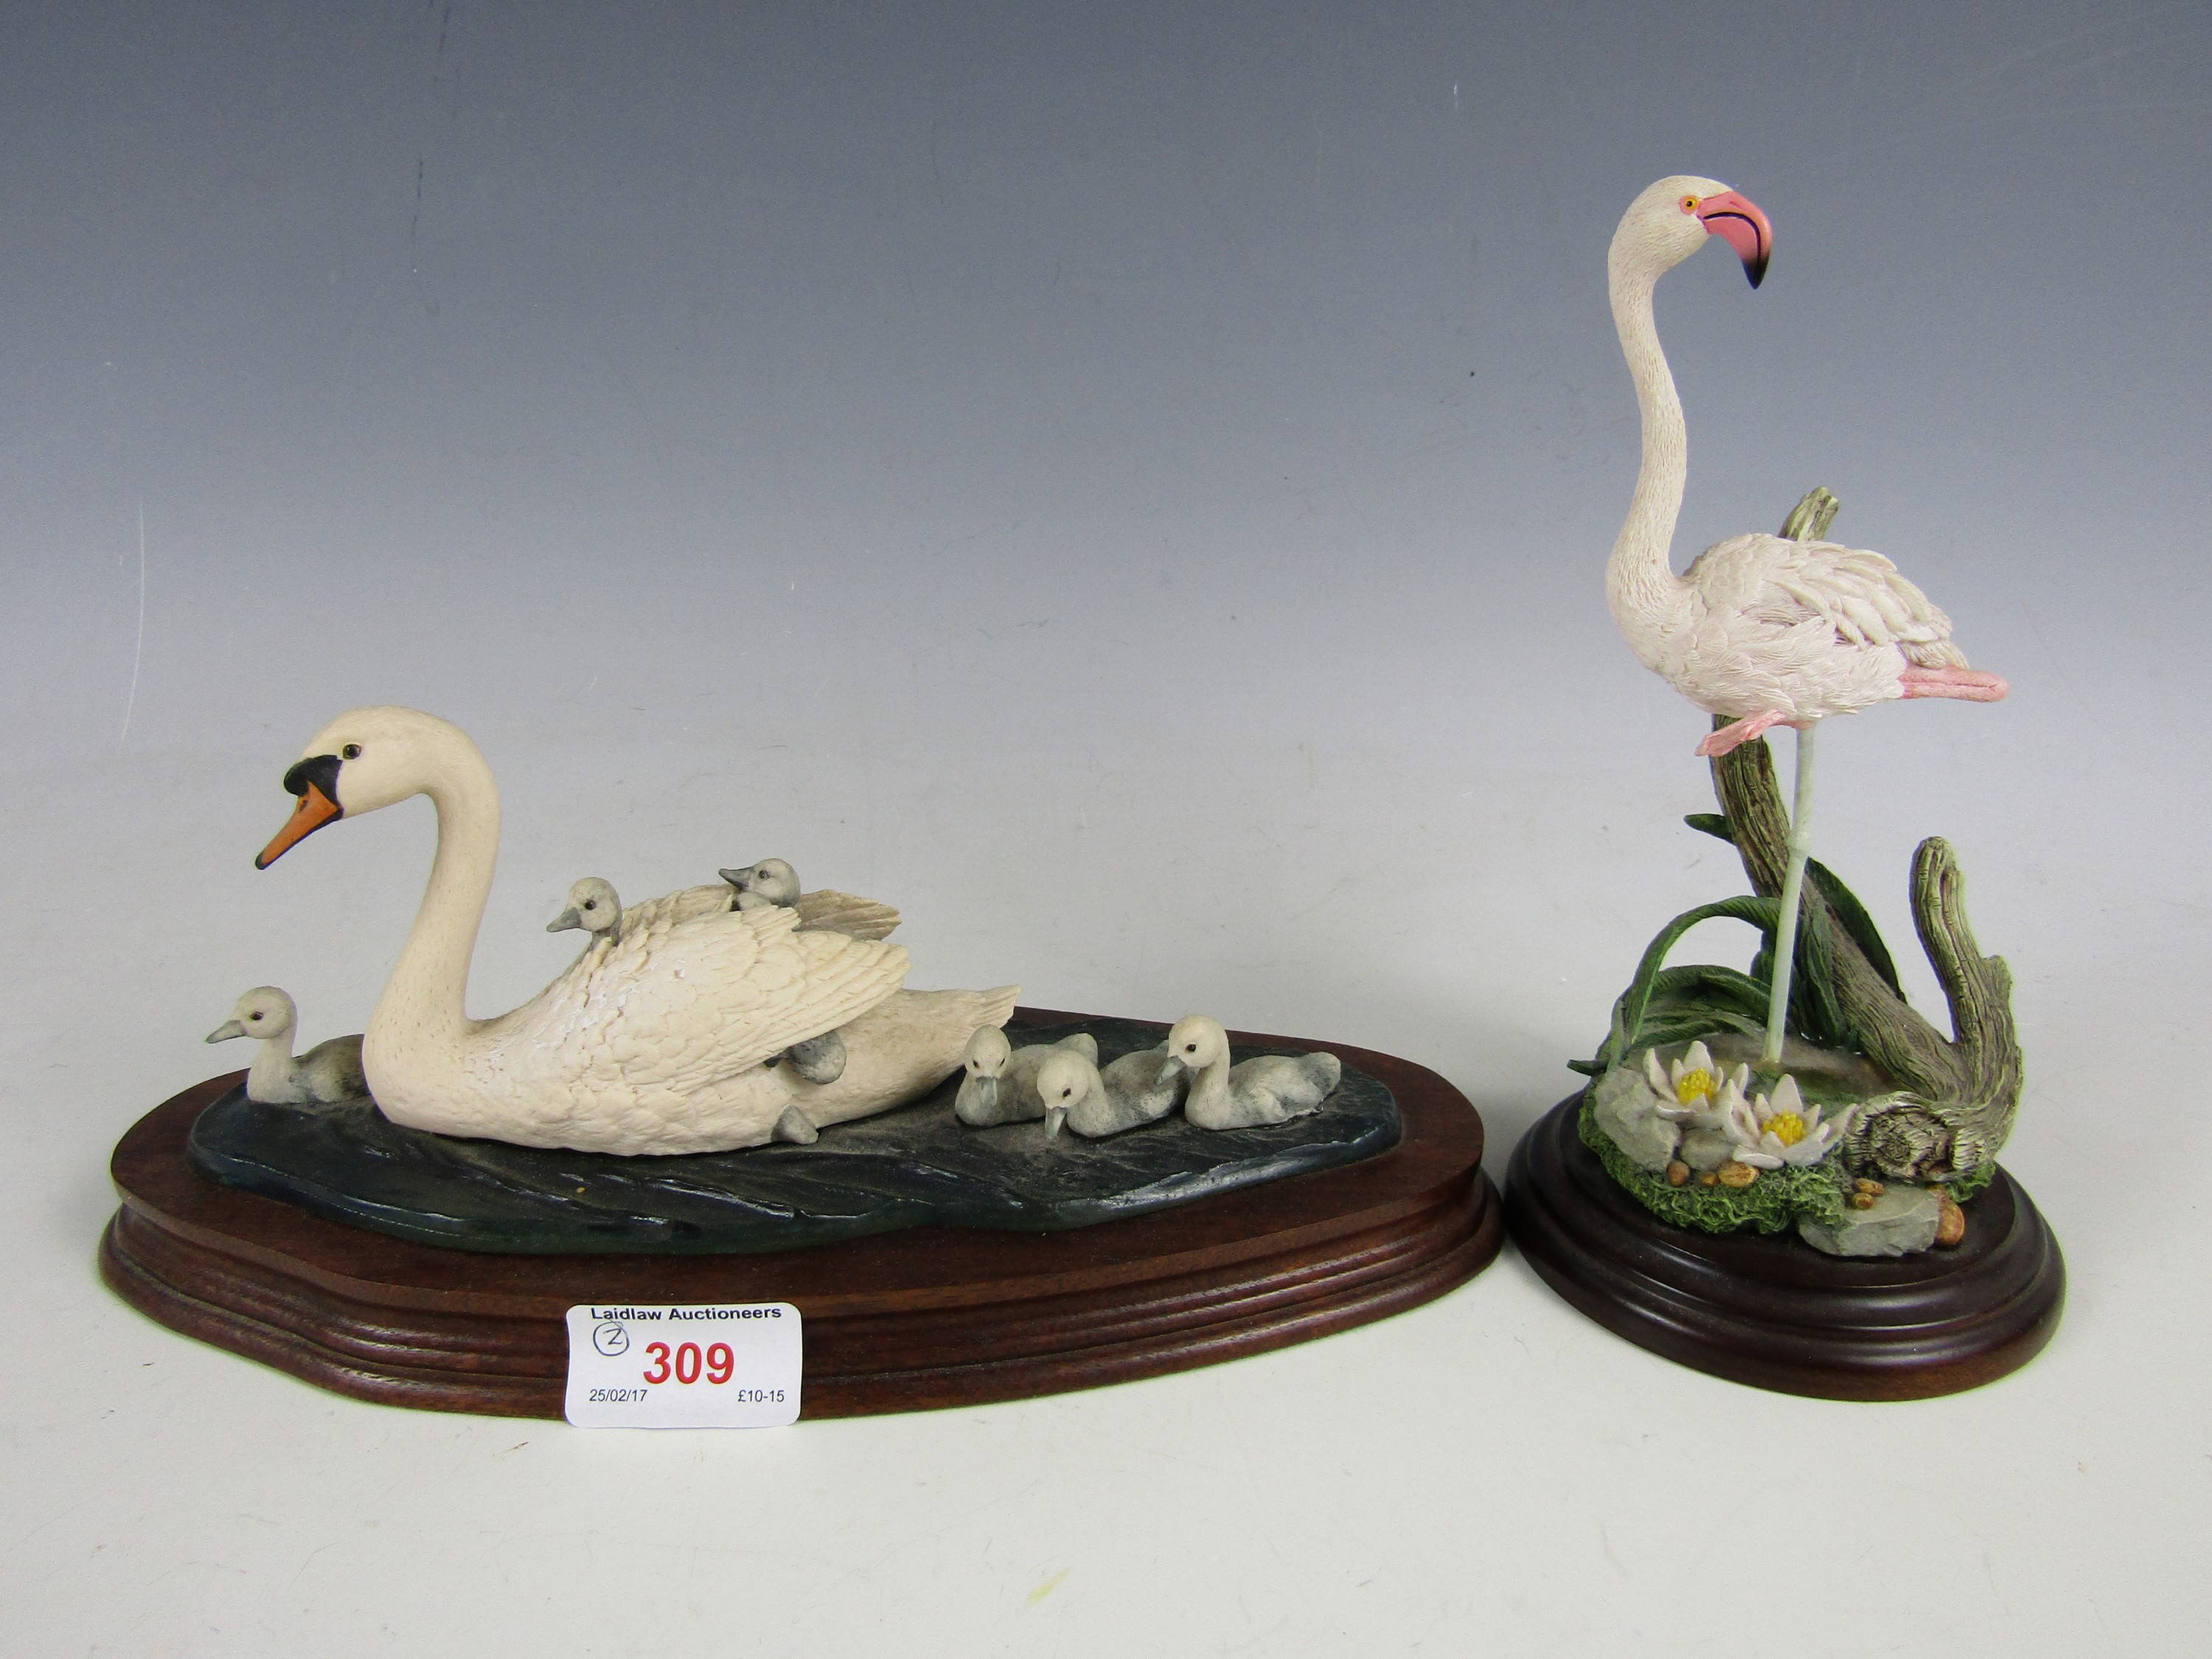 A Border Fine Arts figurine of a swan and signets together with one further Country Artists figurine